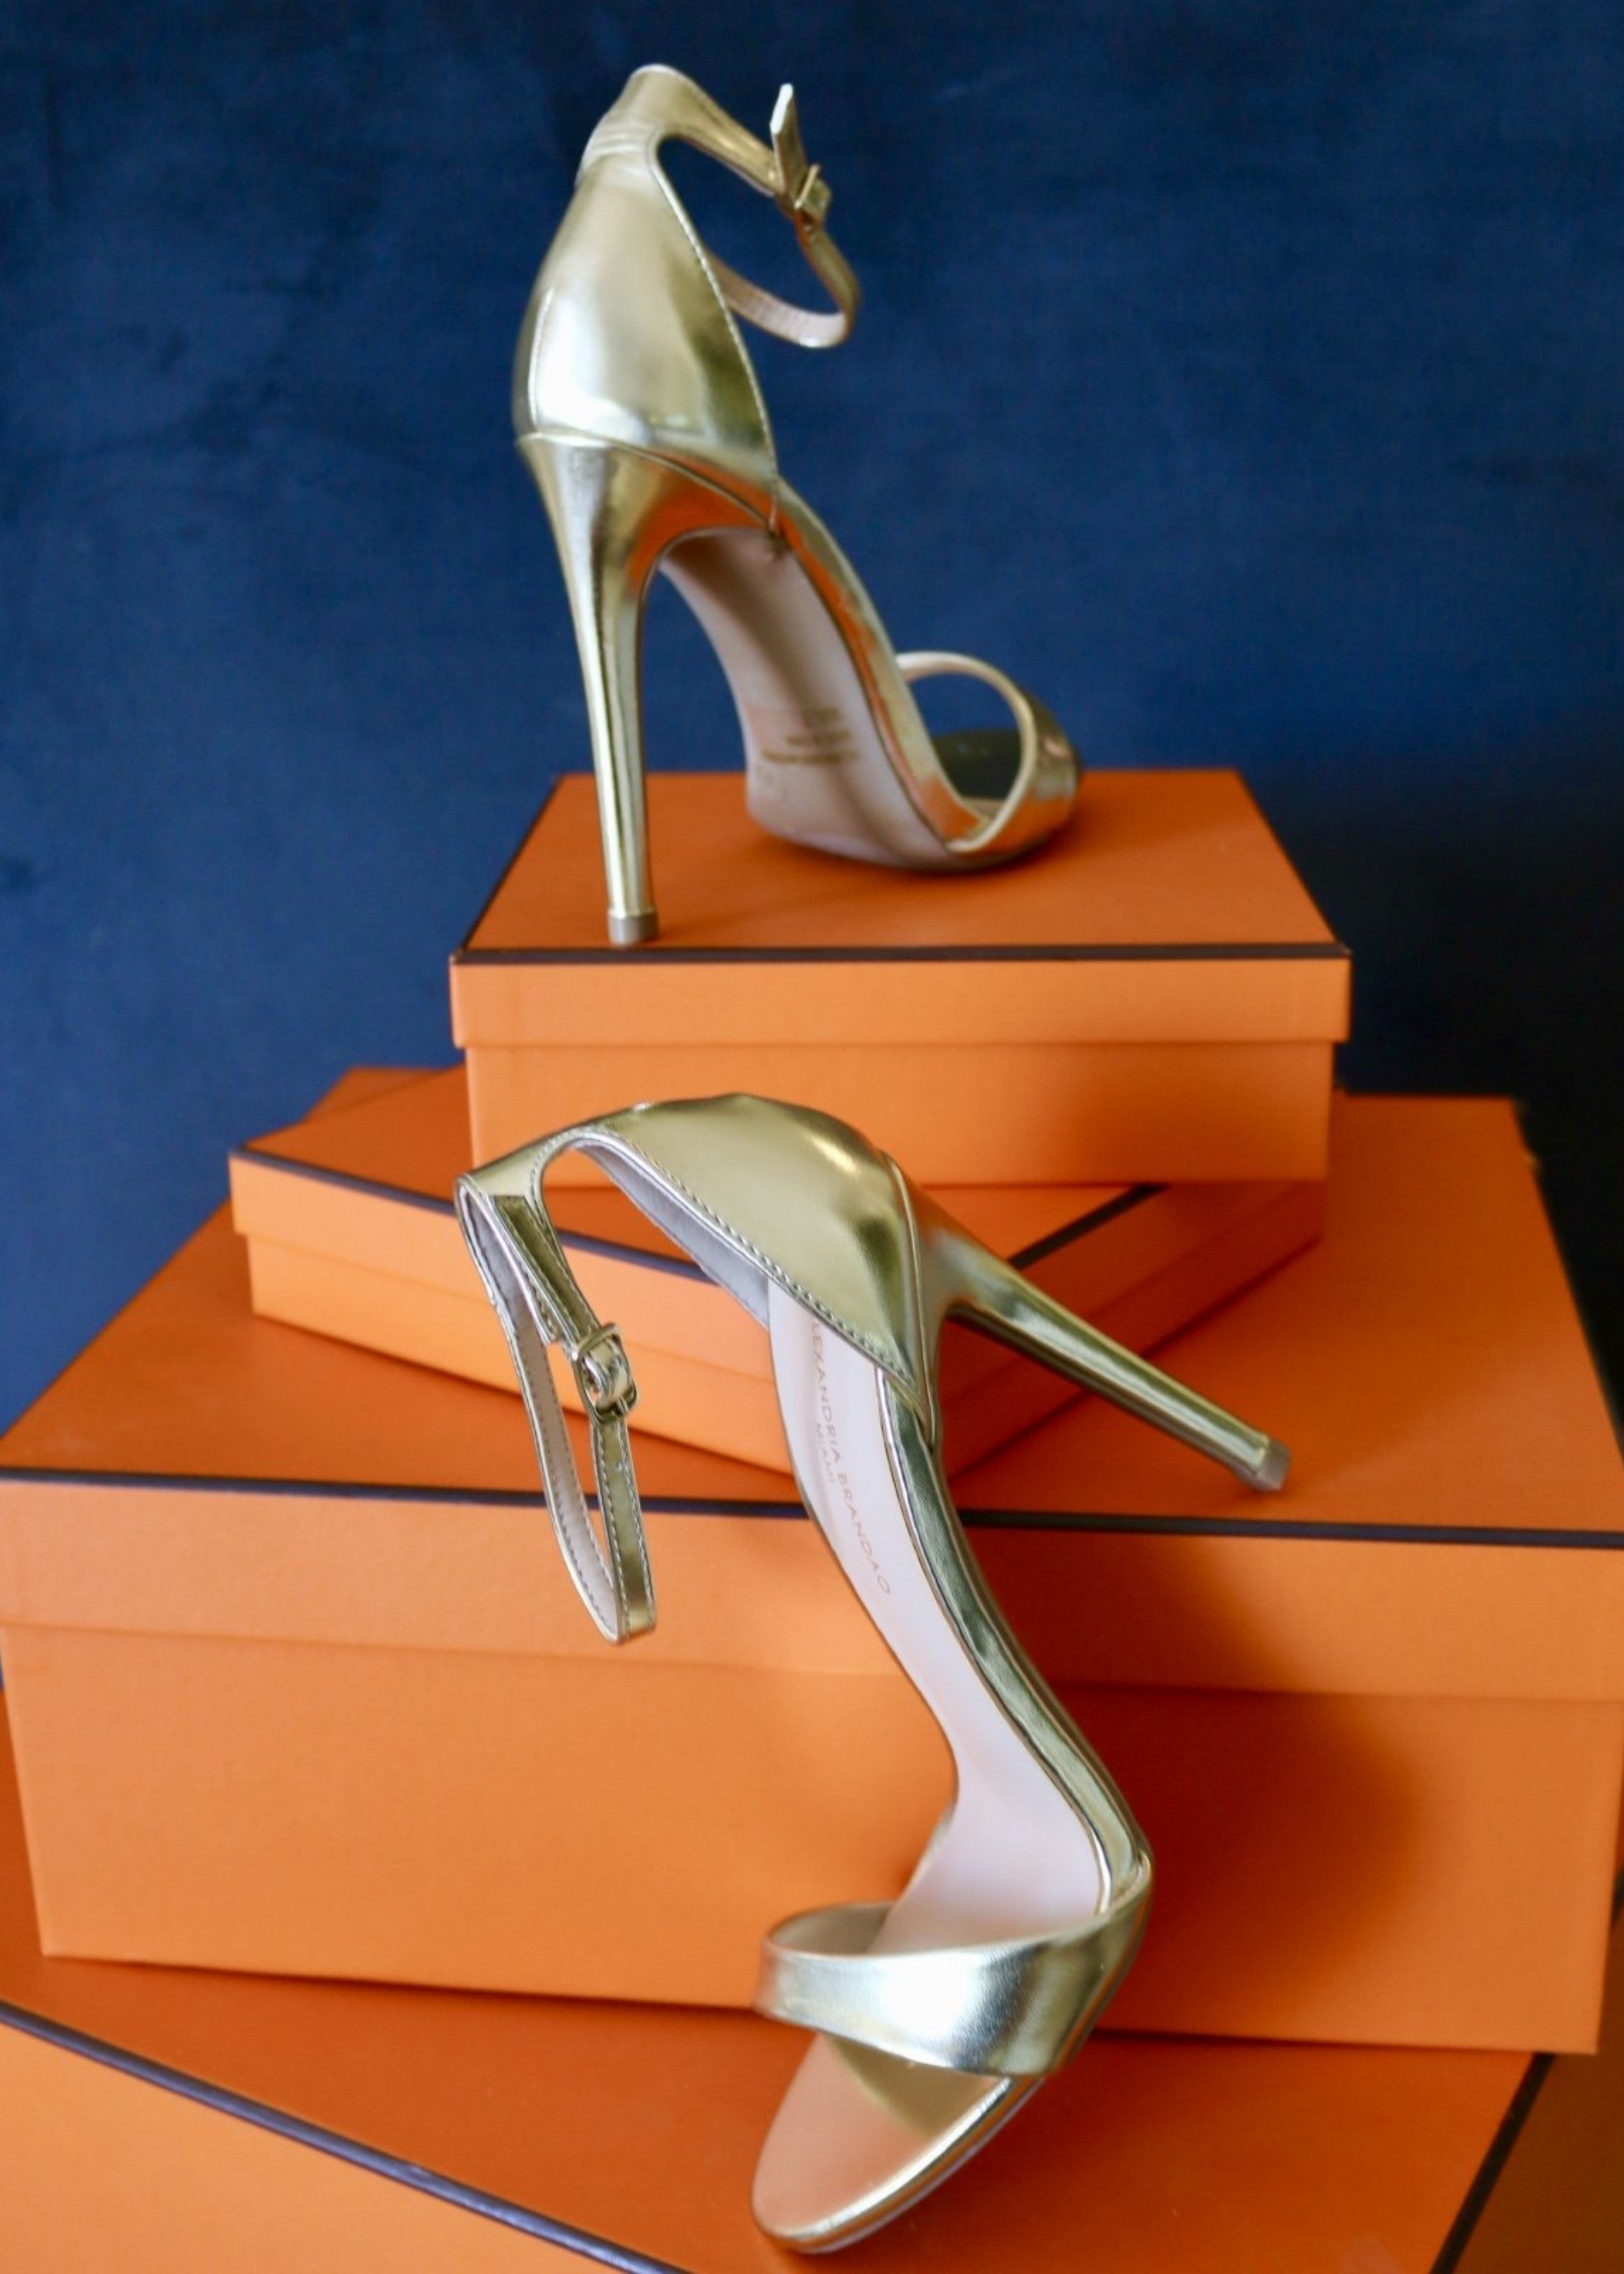 Are high heels bad for your health? Two experts review the evidence